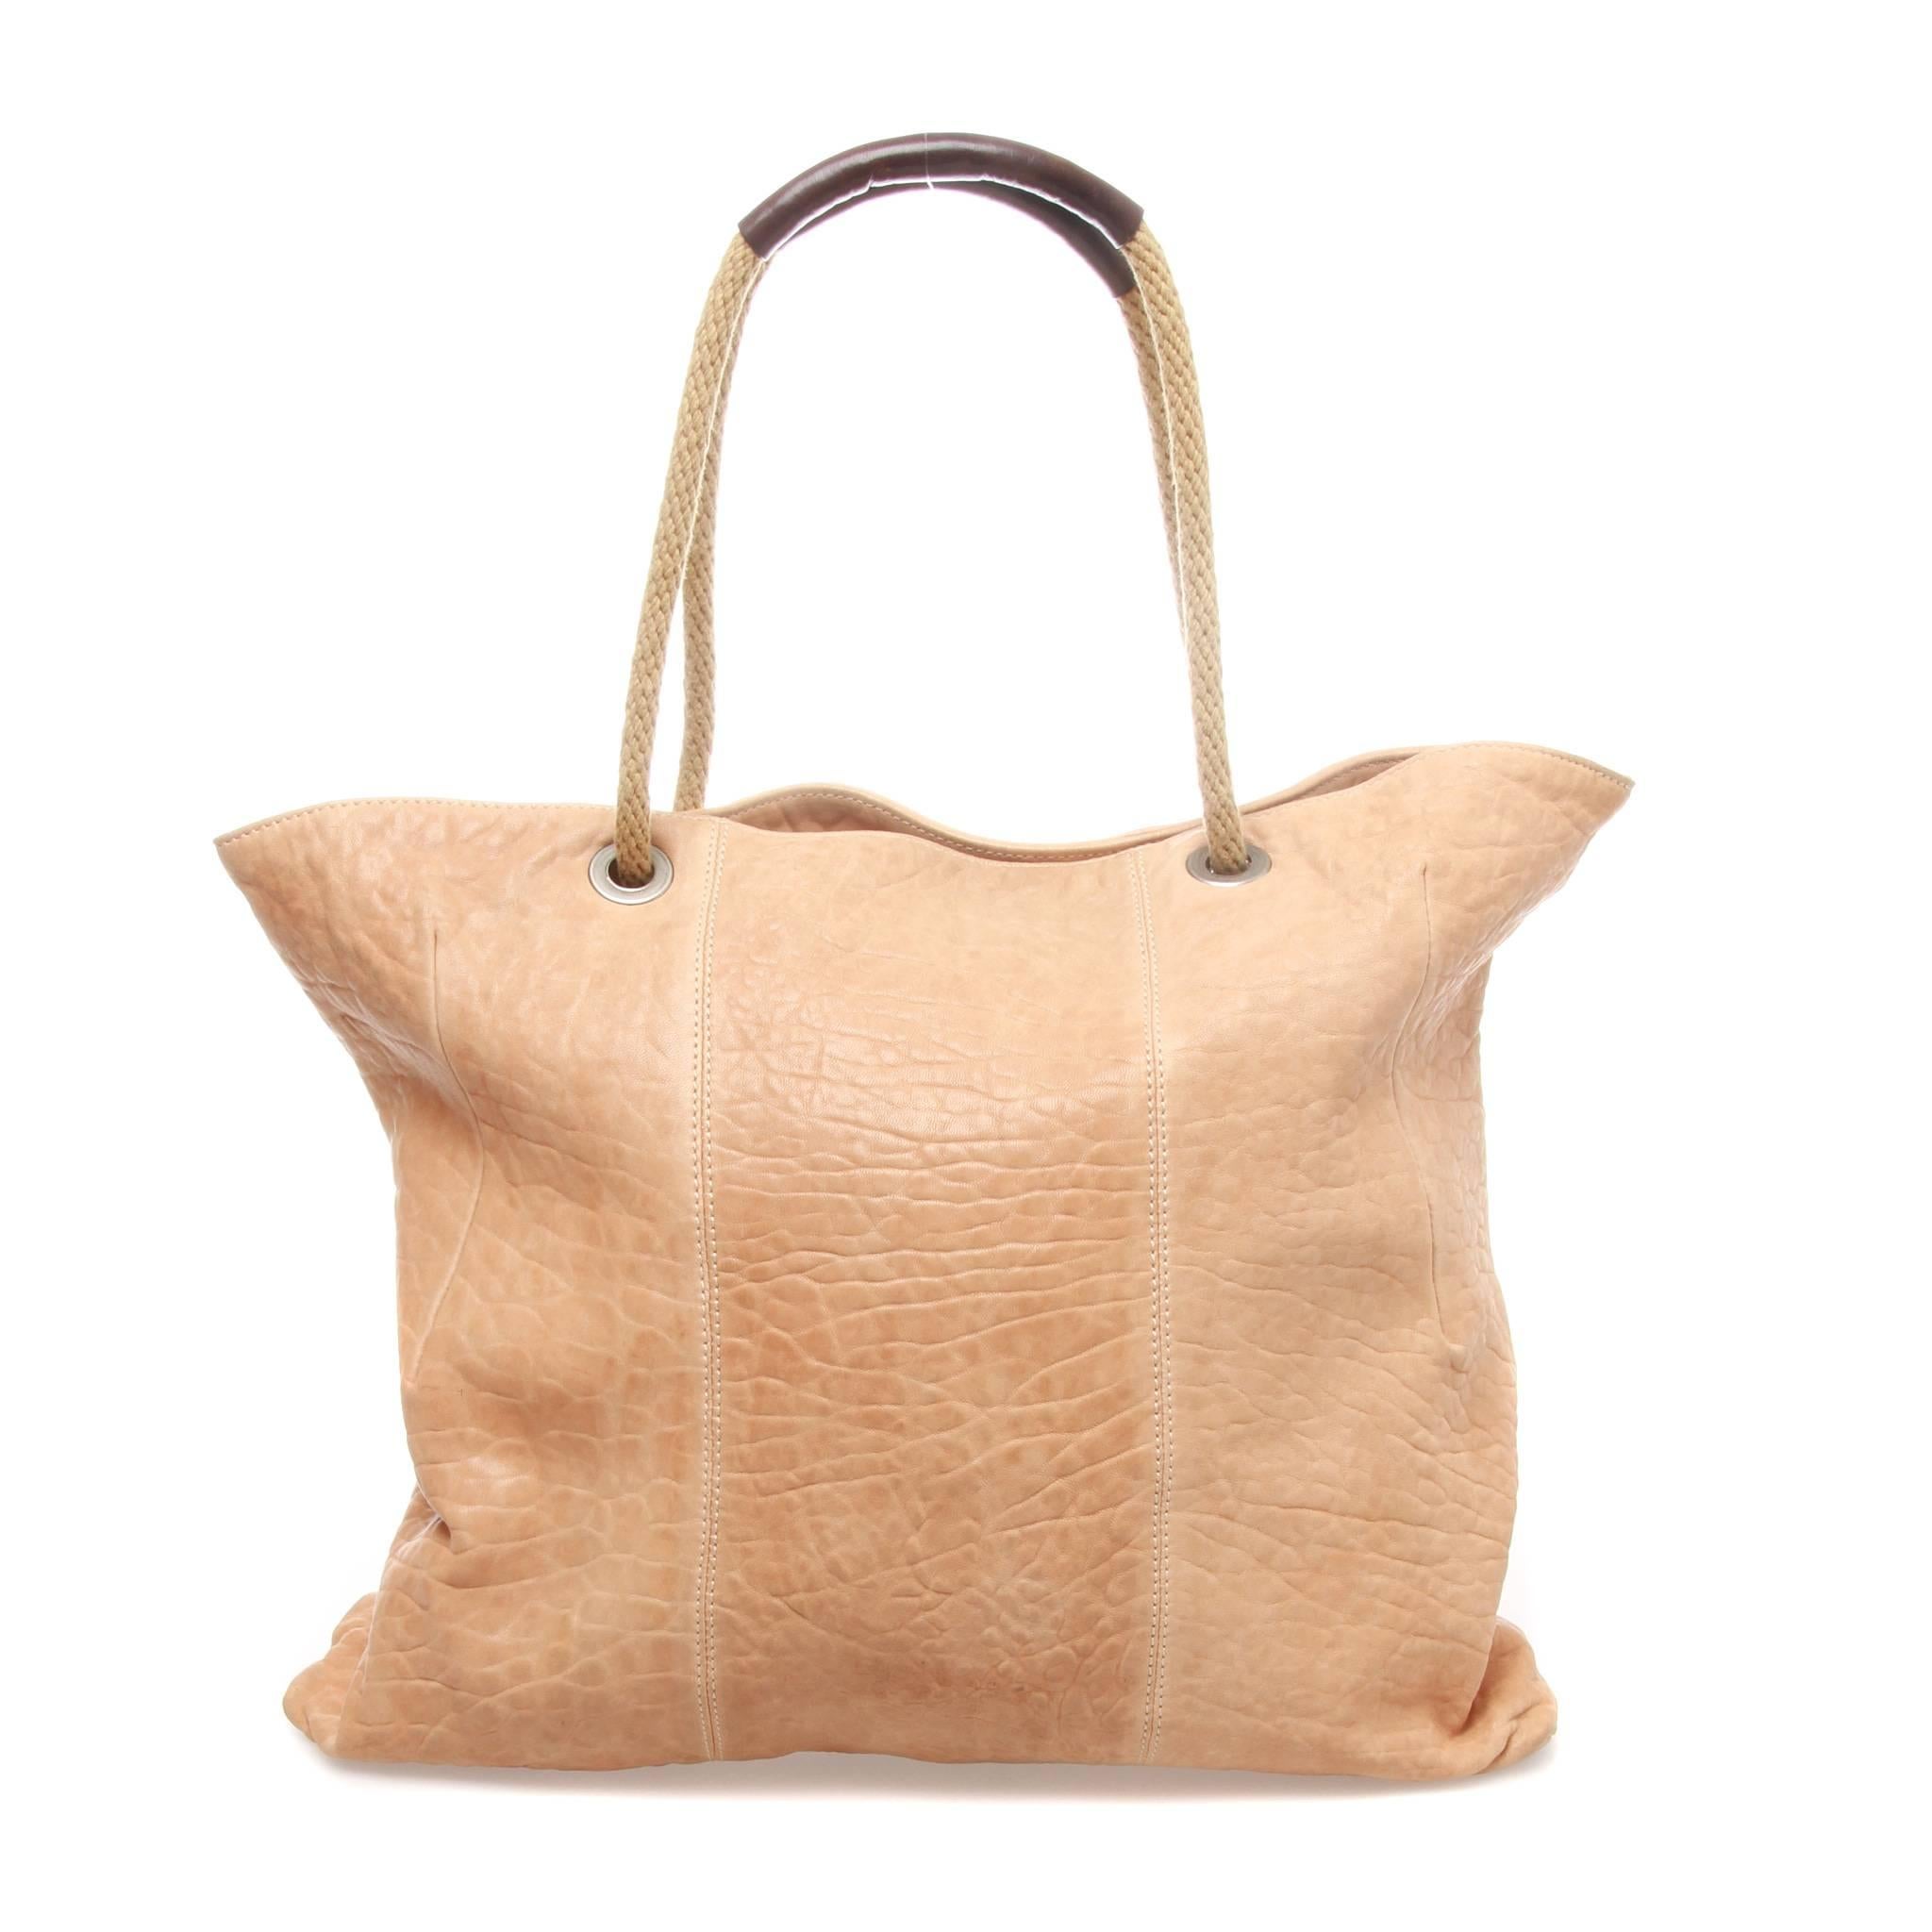 A multi-functional MARNI Beige Leather Shopping Tote.
A large tote features a rope and leather trim straps.
Interior with canvas lining consists of a pocket on both sides, one zipped and one without.